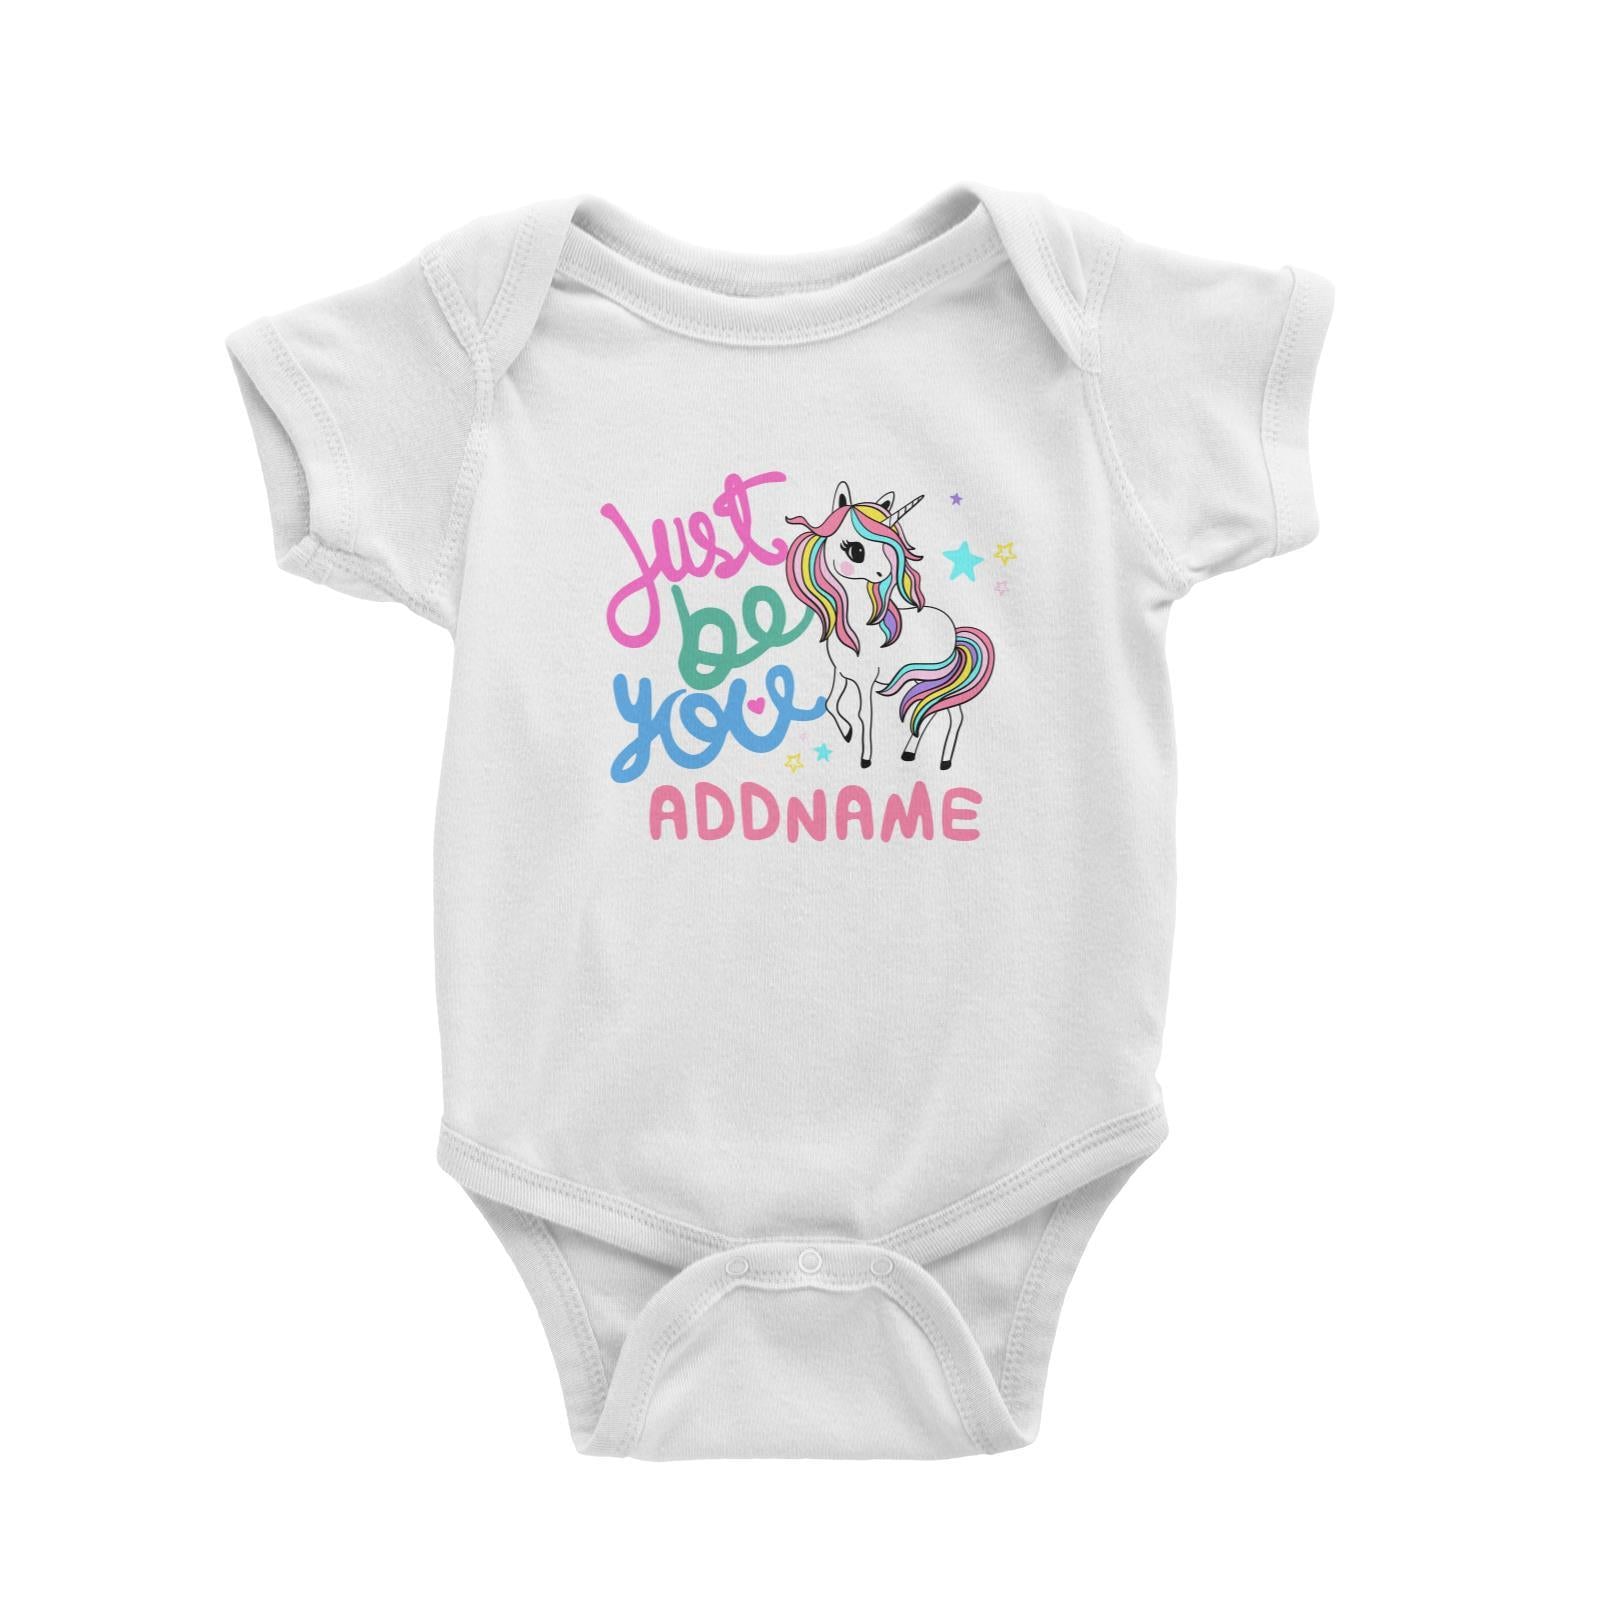 Children's Day Gift Series Just Be You Cute Unicorn Addname Baby Romper